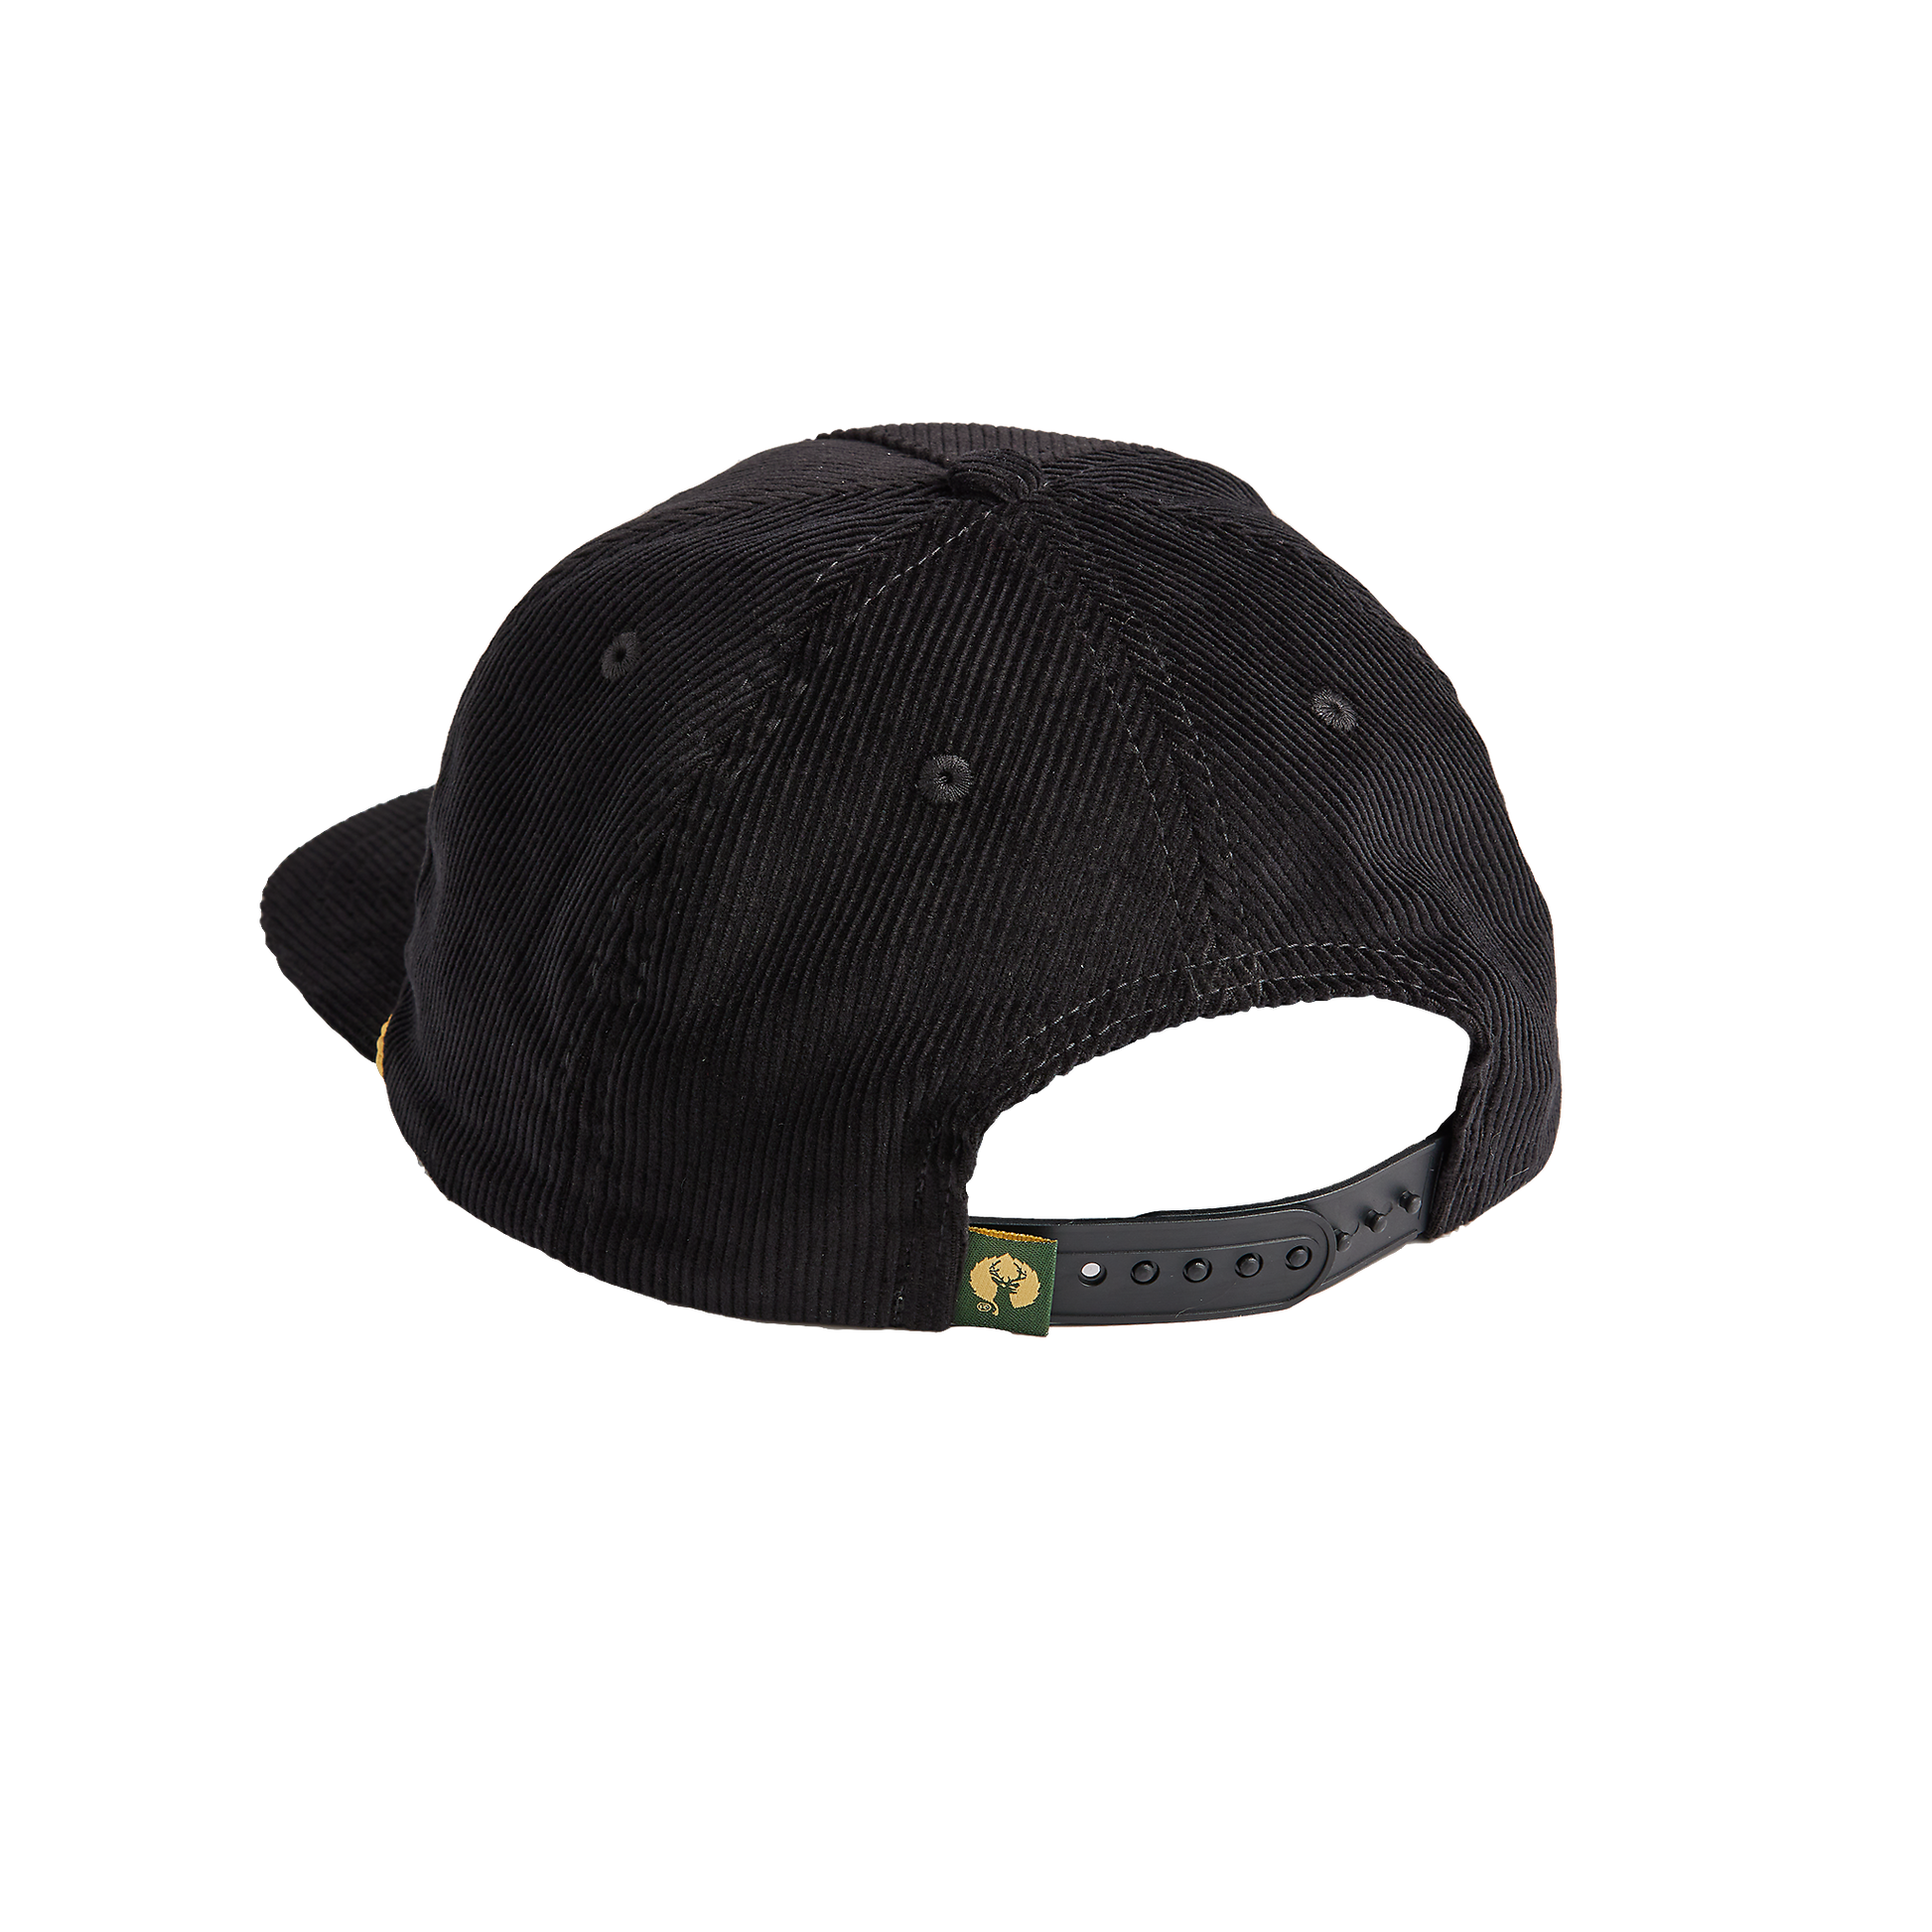 Back view of black corduroy cap with golden rope across brim and adjustable snapback